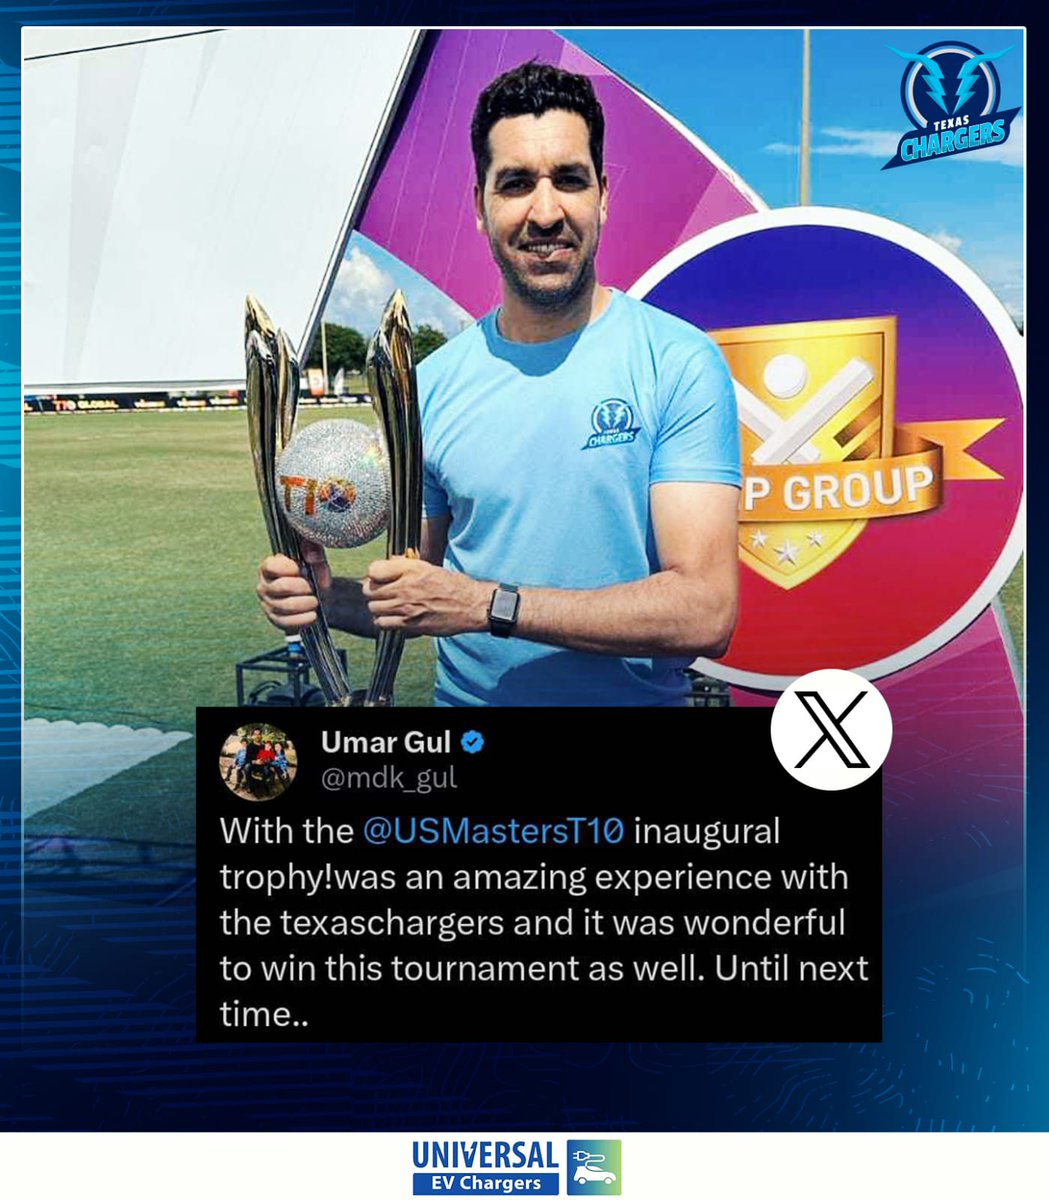 Until we meet again, mate! 👋 @mdk_gul looking stylish with the #USMastersT10 trophy 🏆🌟 #TexasChargers #USMastersT10 #UmarGul